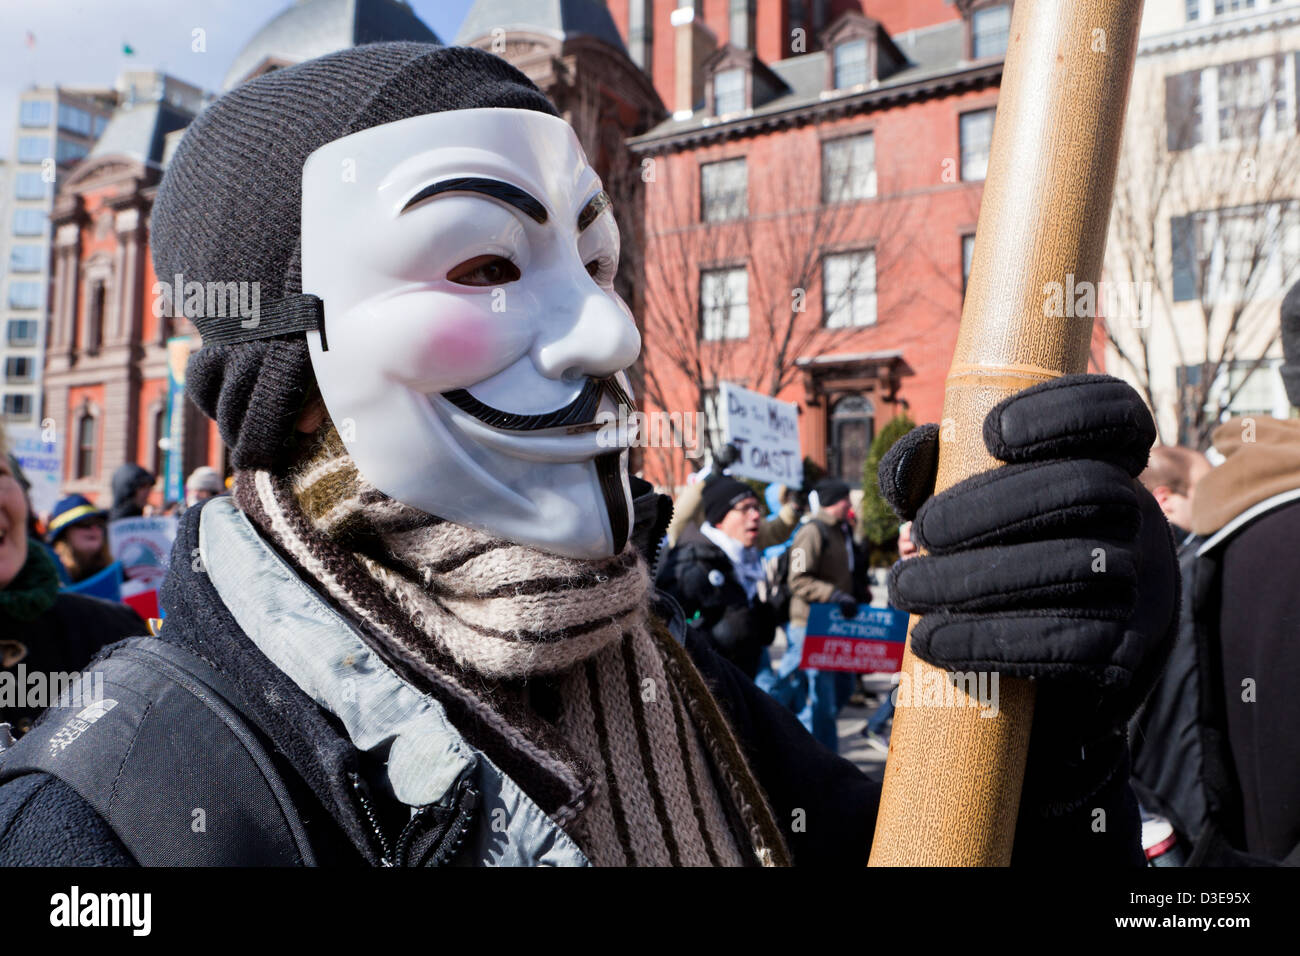 Man wearing a Guy Fawkes mask during protest rally Stock Photo